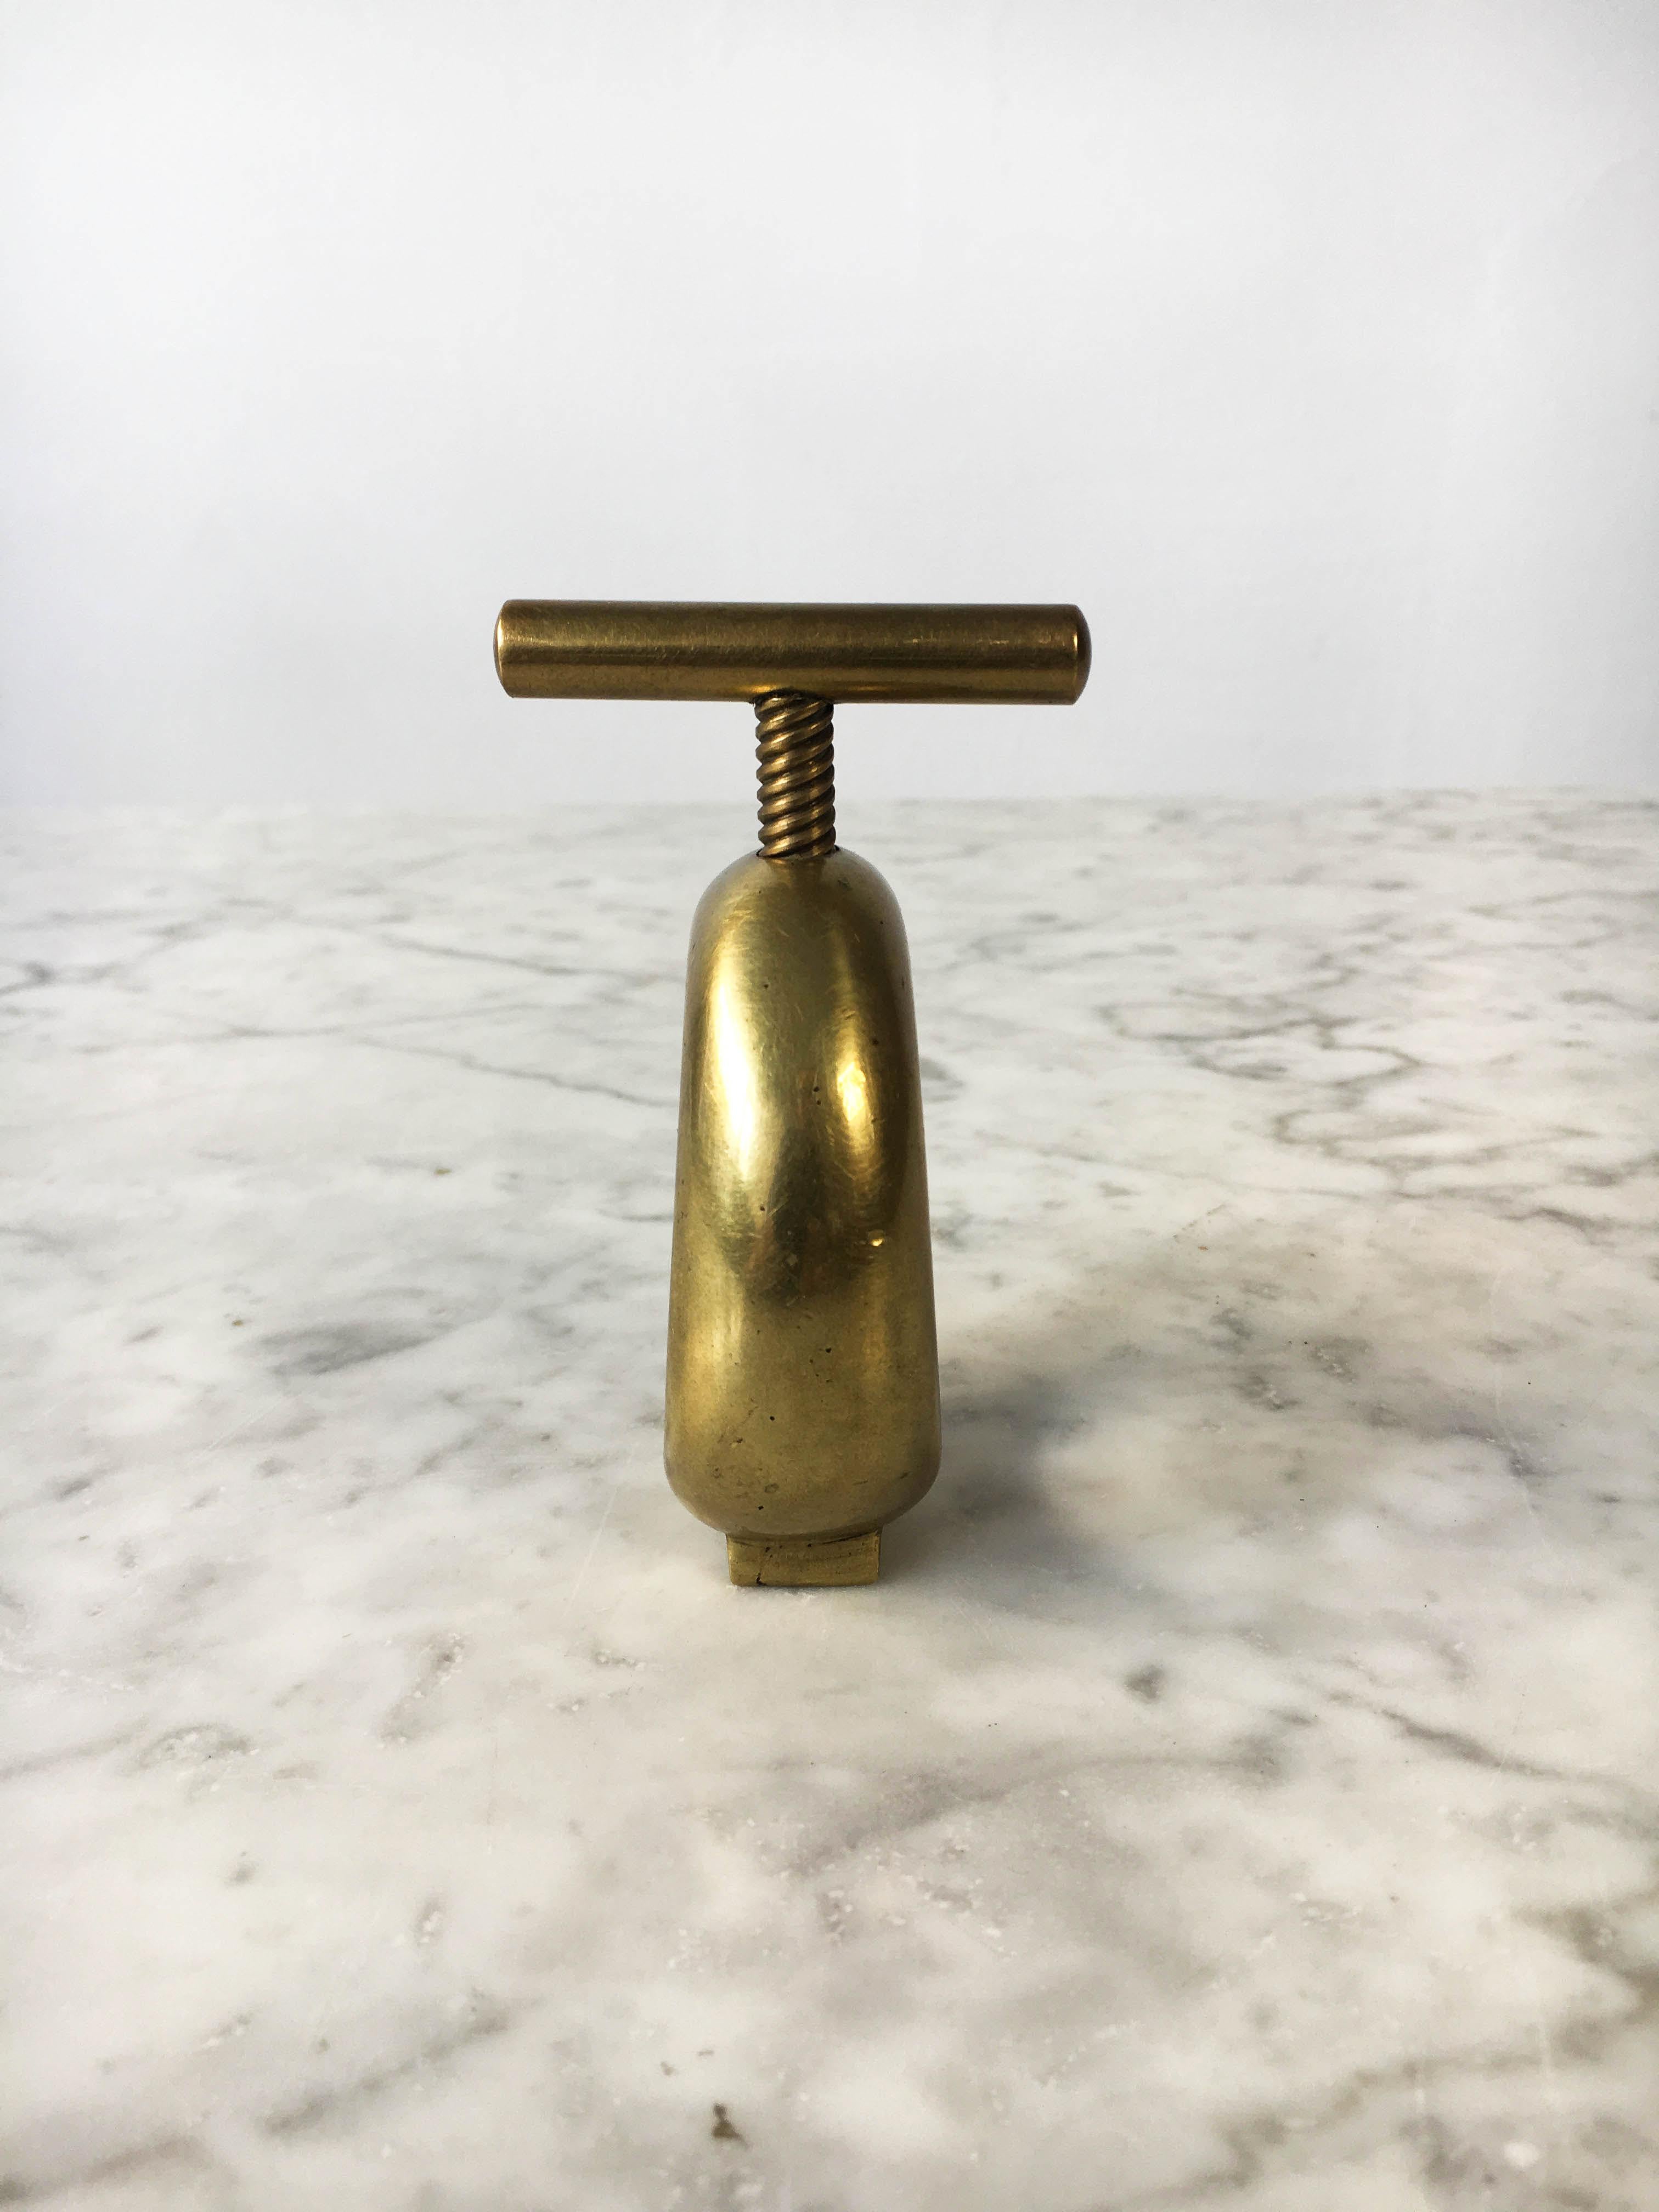 A beautiful modernist nutcracker and design object by Carl Auböck. In excellent vintage condition with just the right amount of gently aged patina on the brass and leather. Signed Auböck.
 